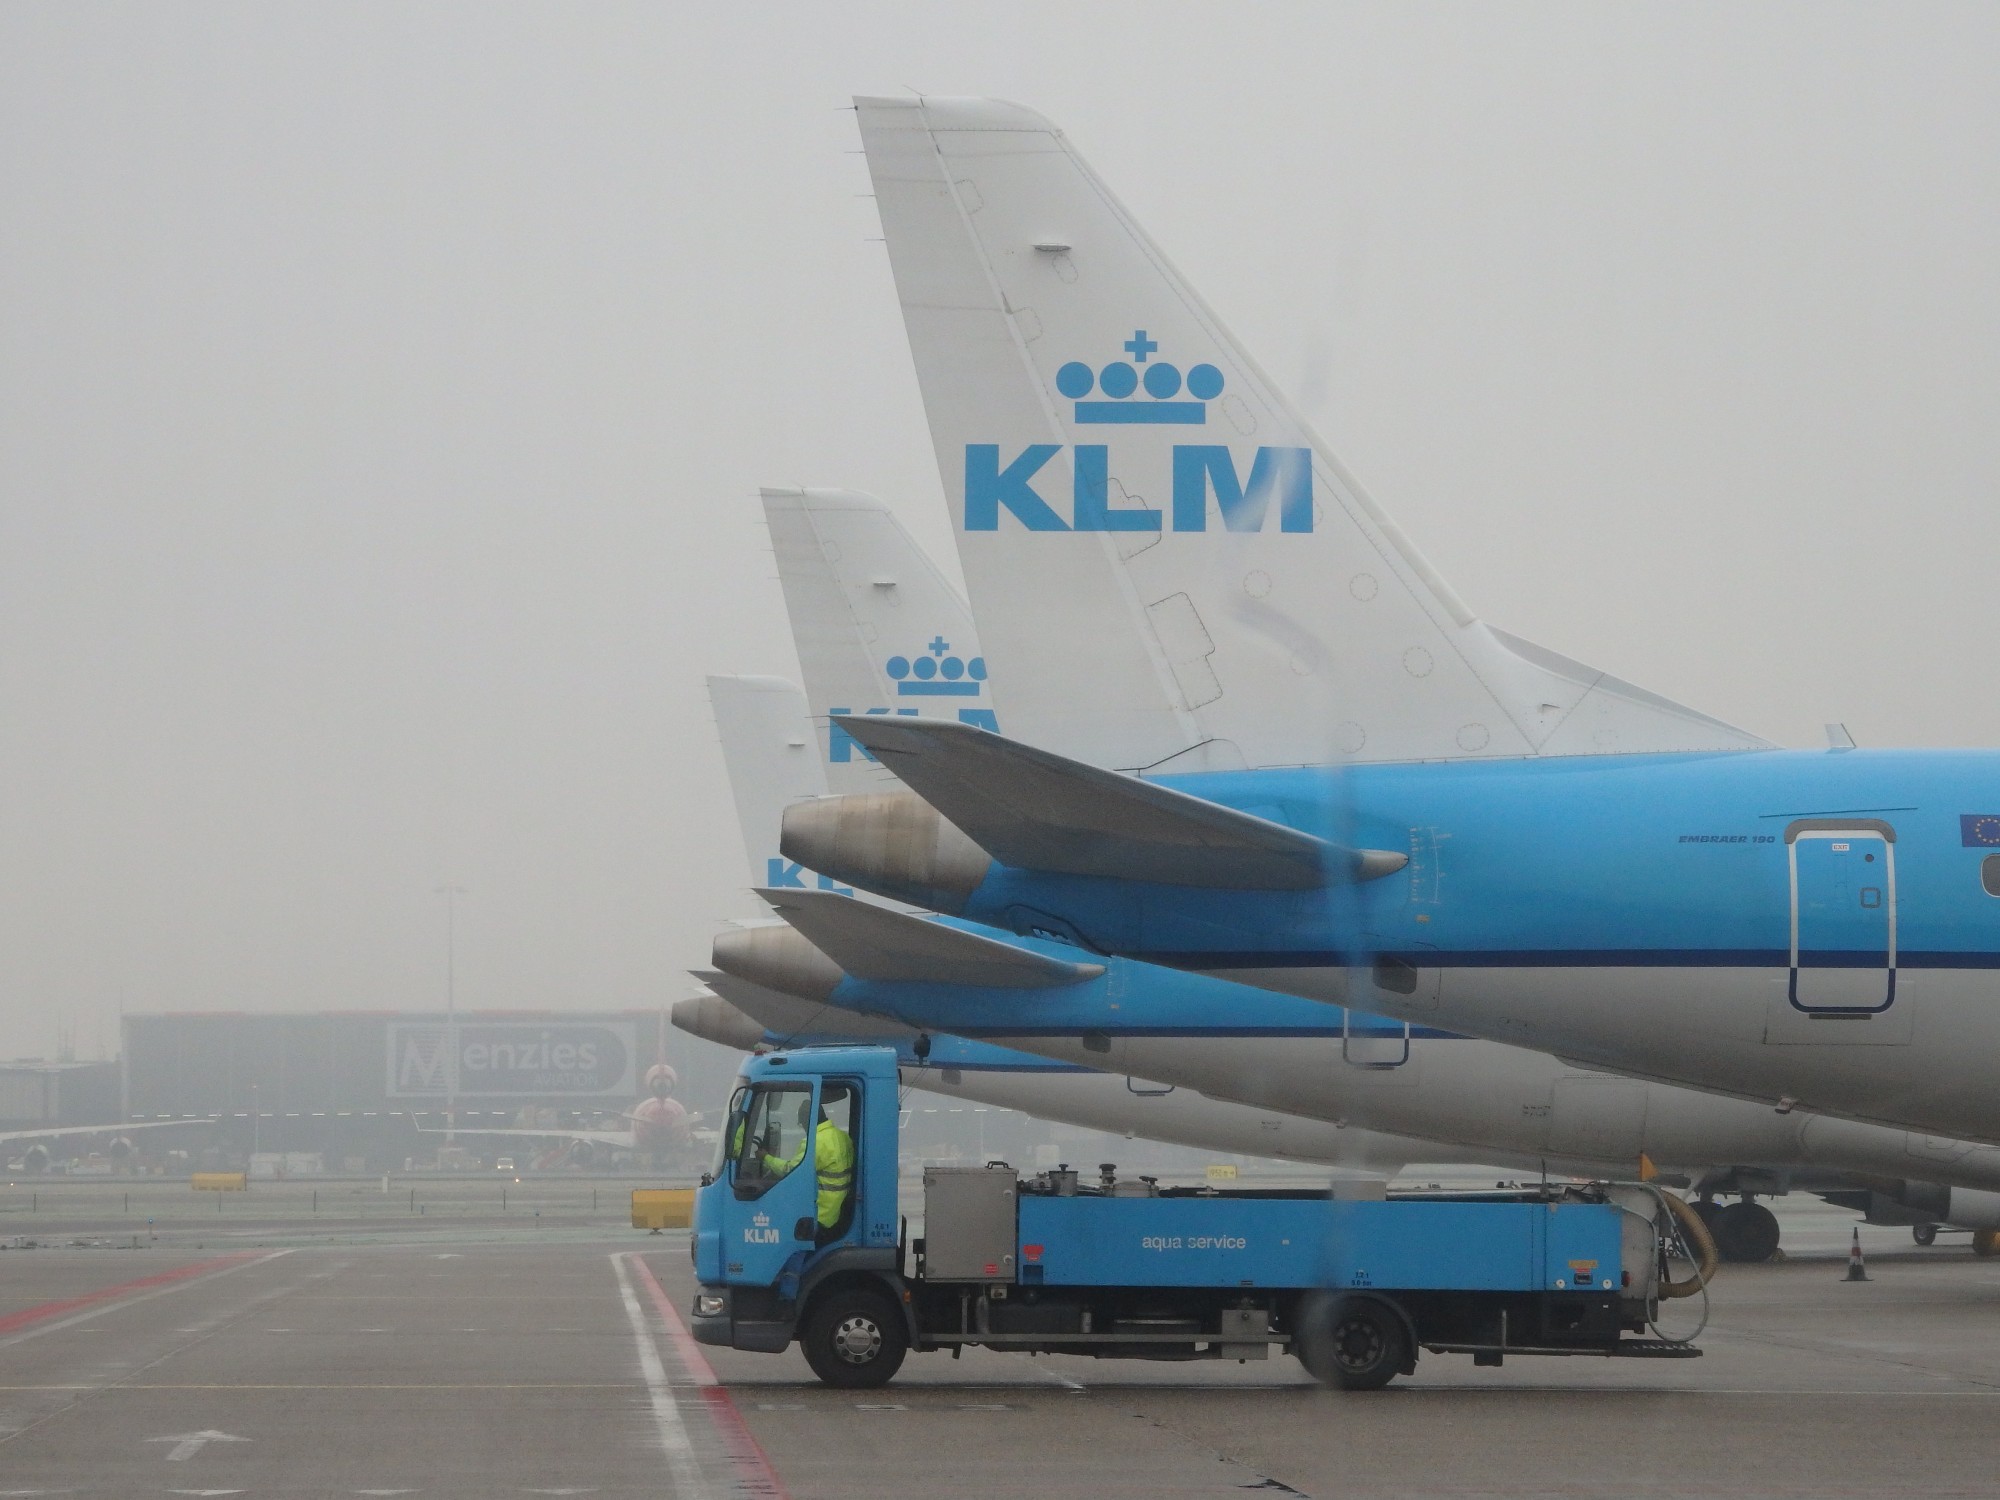 parked planes at Schiphol airport in the Netherlands